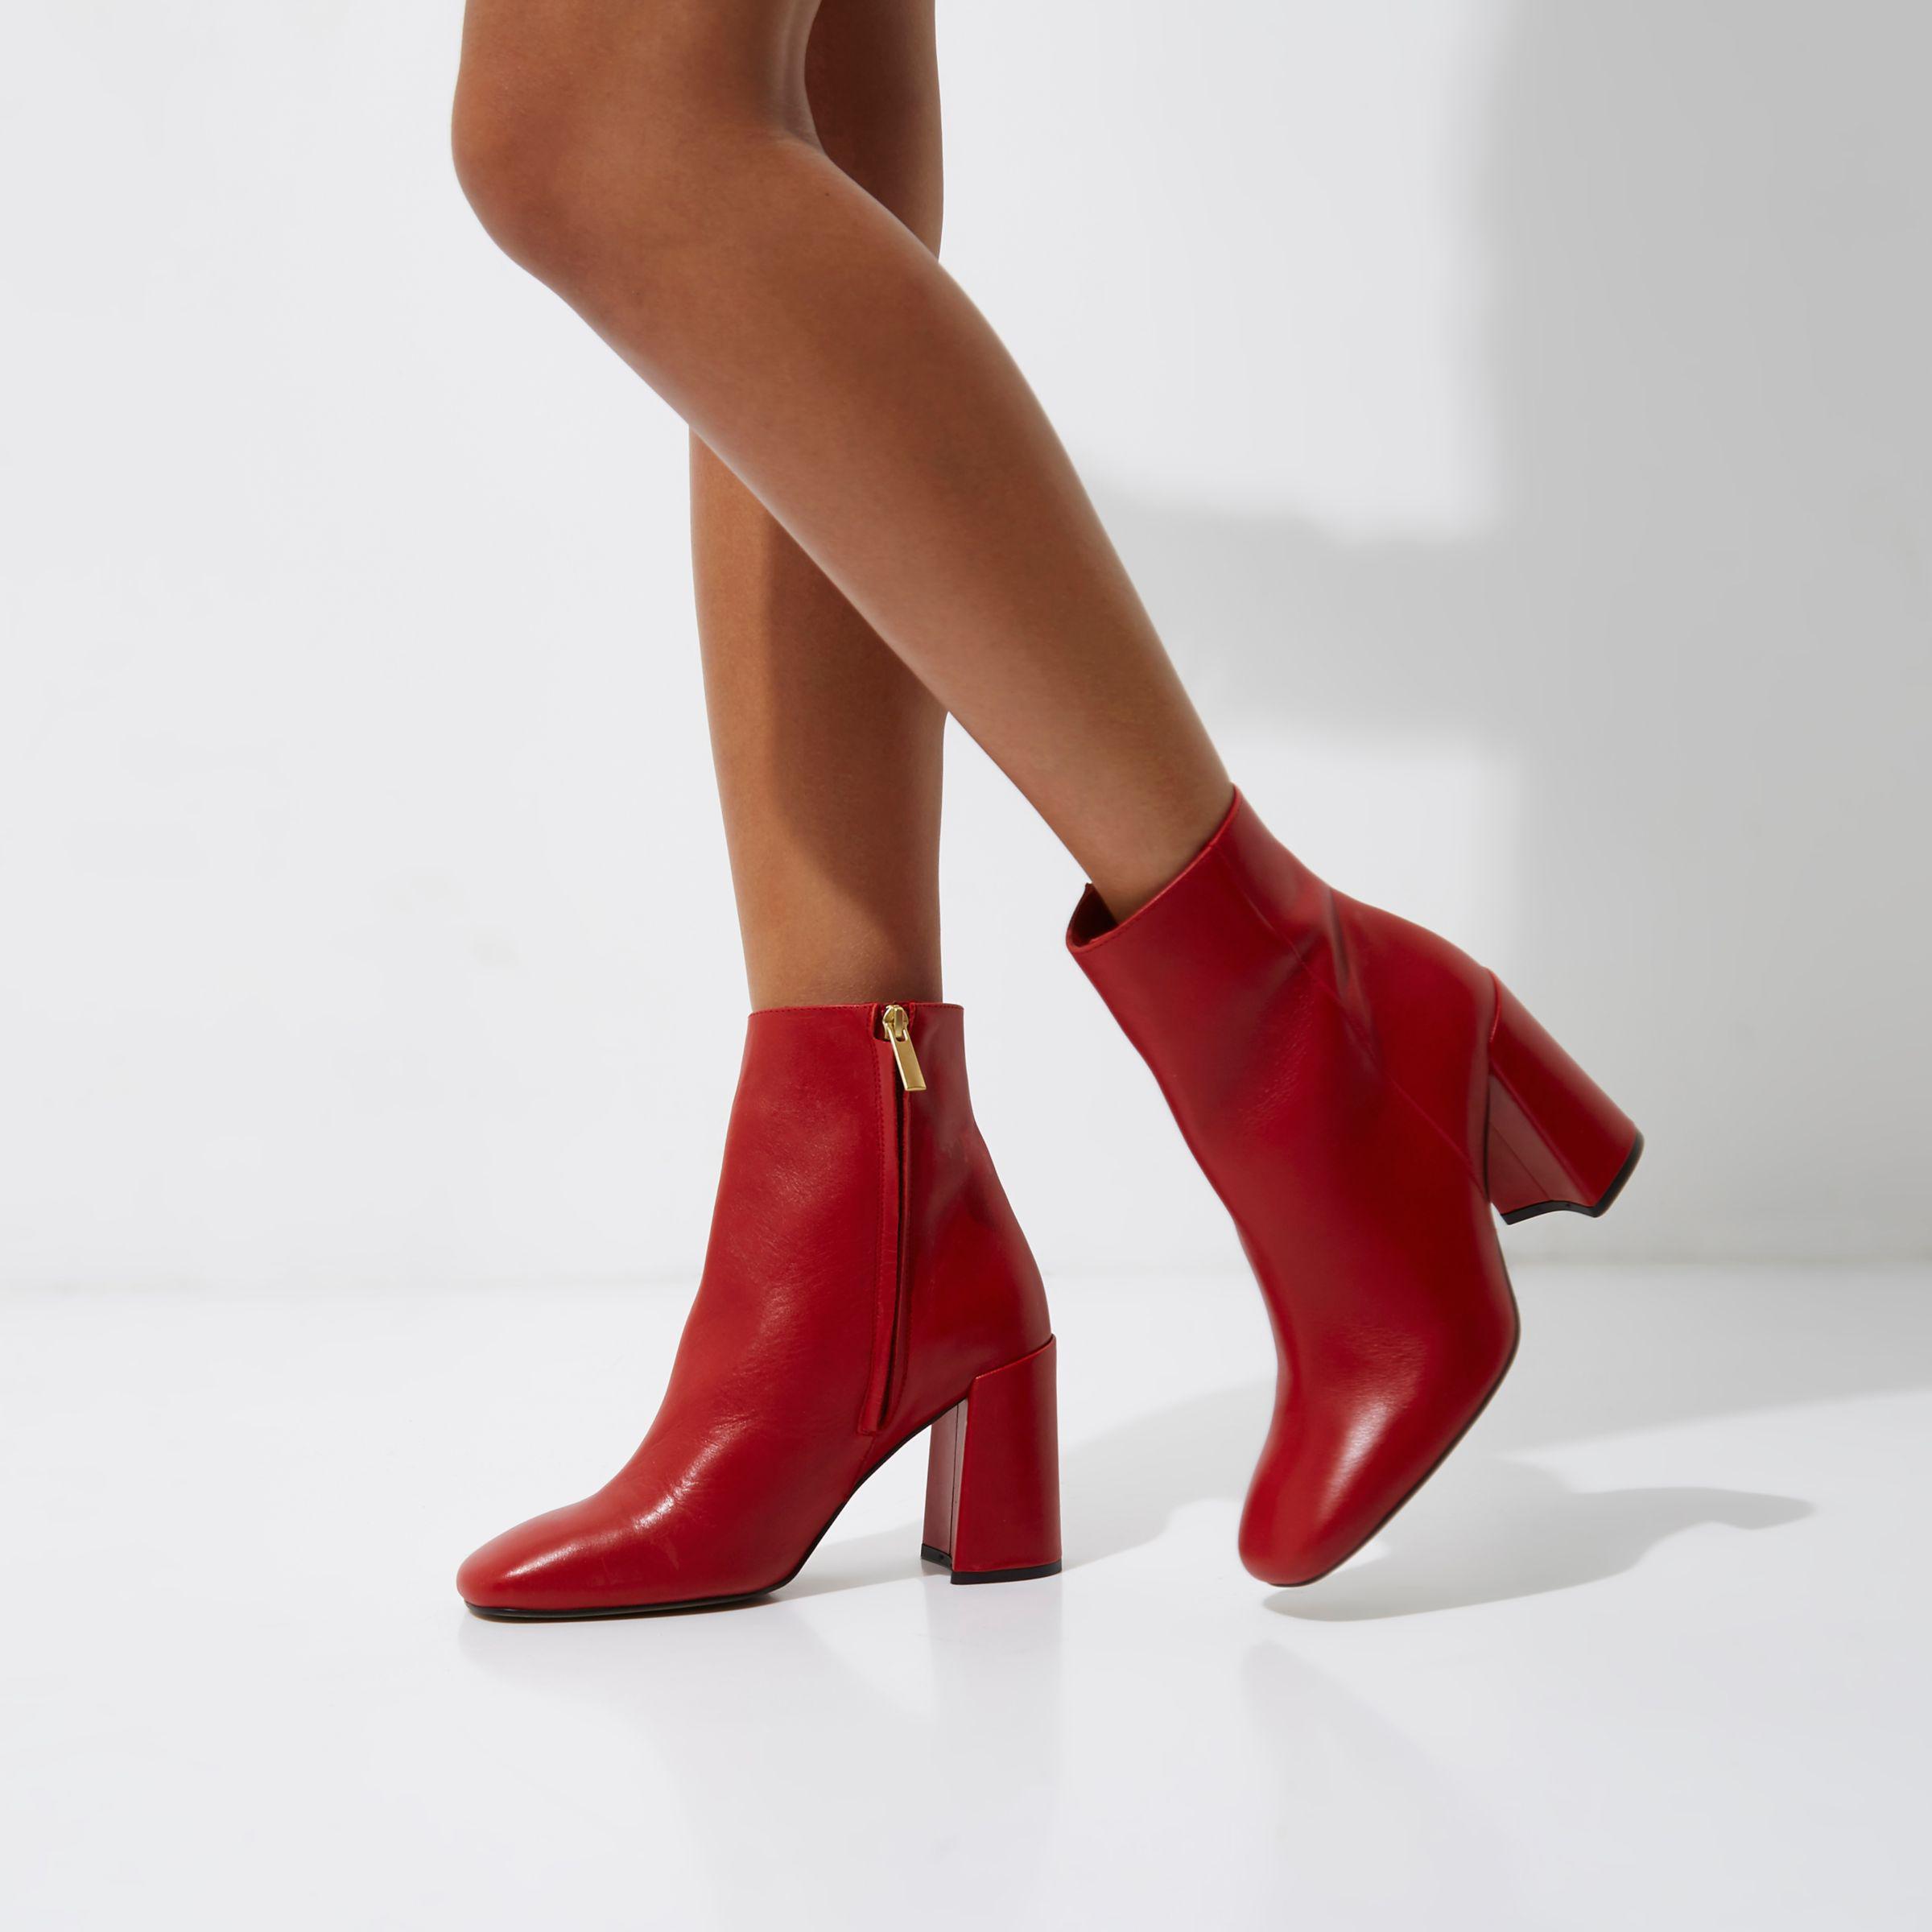 River Island Red Leather Block Heel Ankle Boots - Lyst